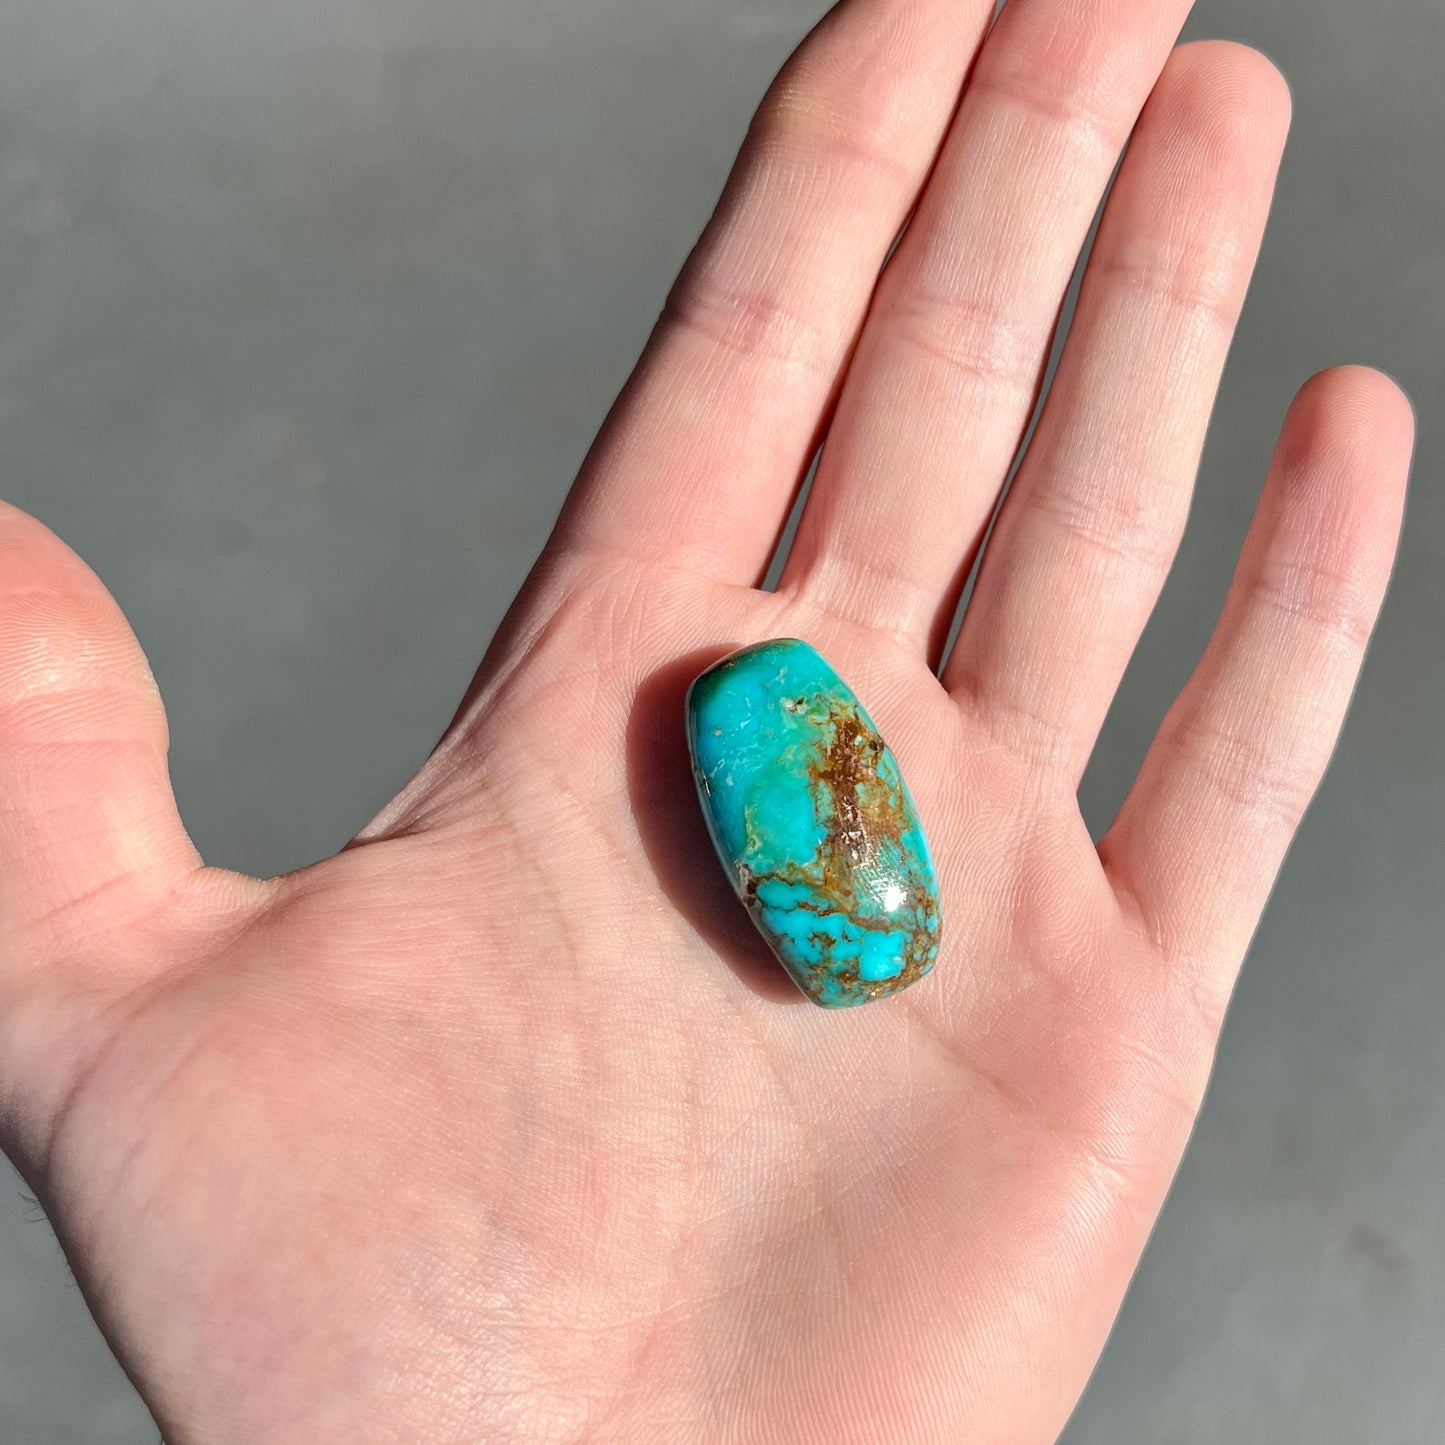 A loose, polished cabochon cut turquoise stone from Royston Mining District, Nevada.